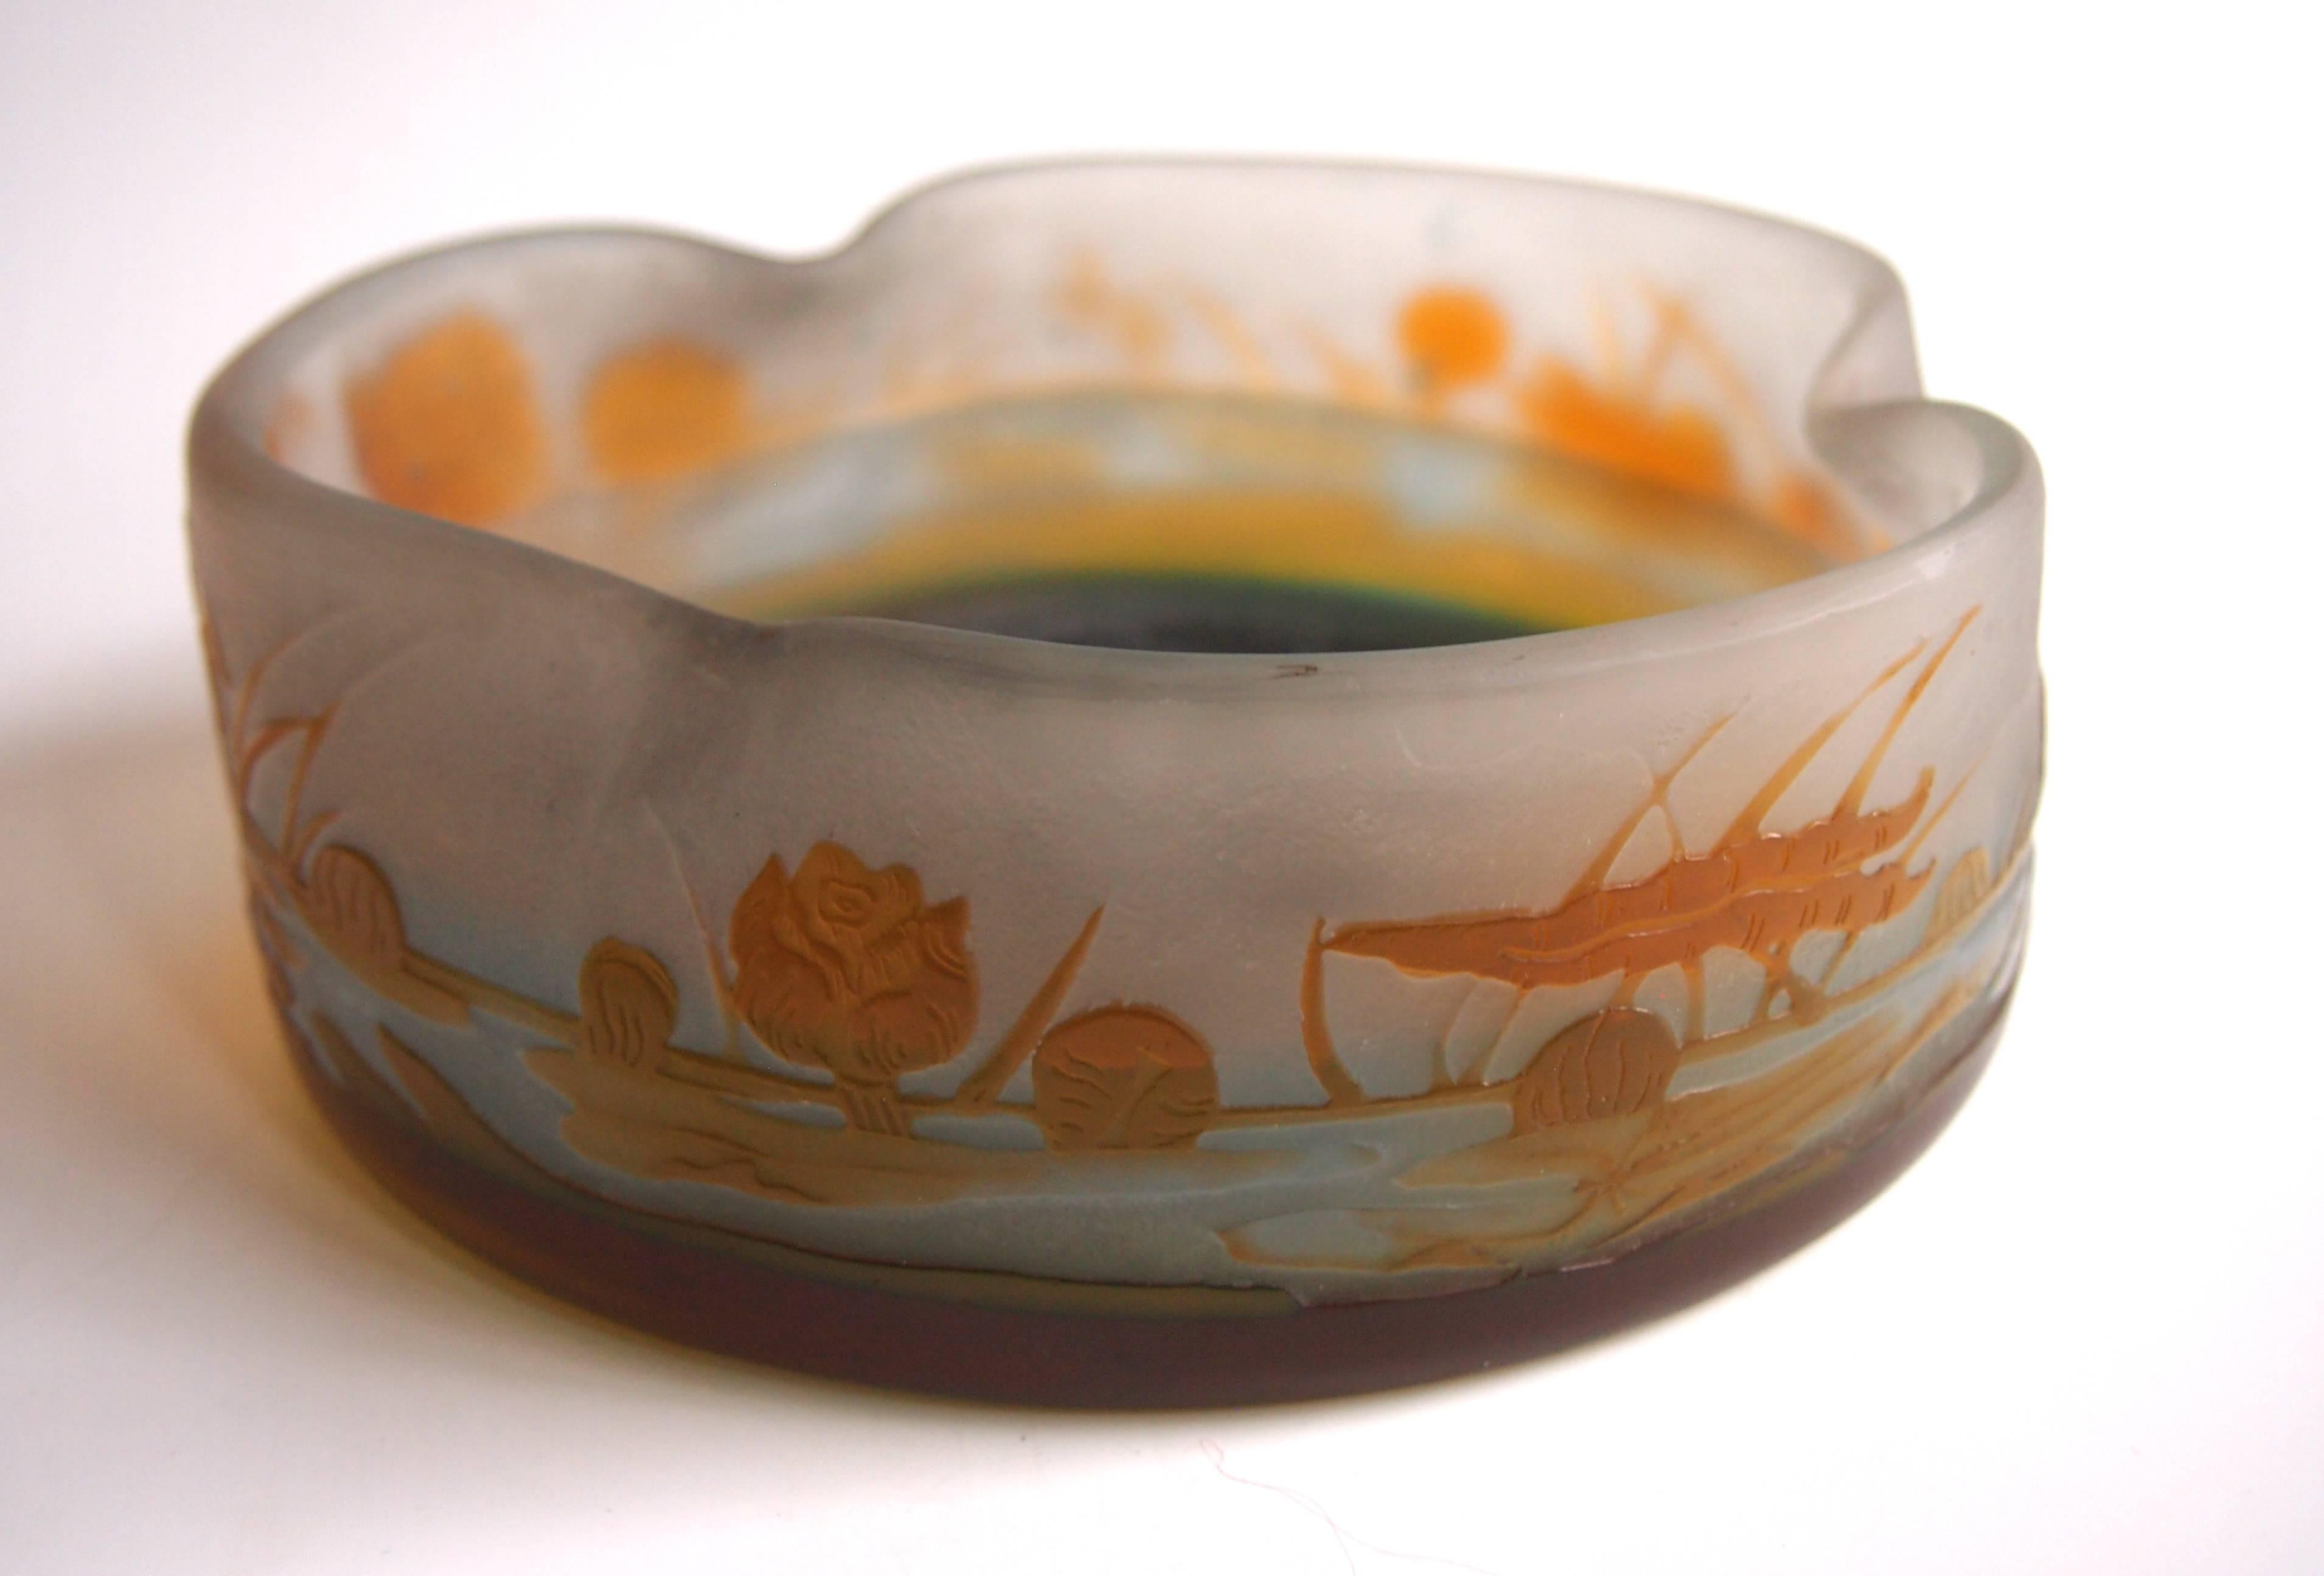 Super Art Nouveau Emile Galle cameo aquatic low bowl in orange over blue depicting a extensive pond scene with flowing water lilies, cameo signature with a star (image 4). The star indicates it was made just after Emile Galle's death -the signature